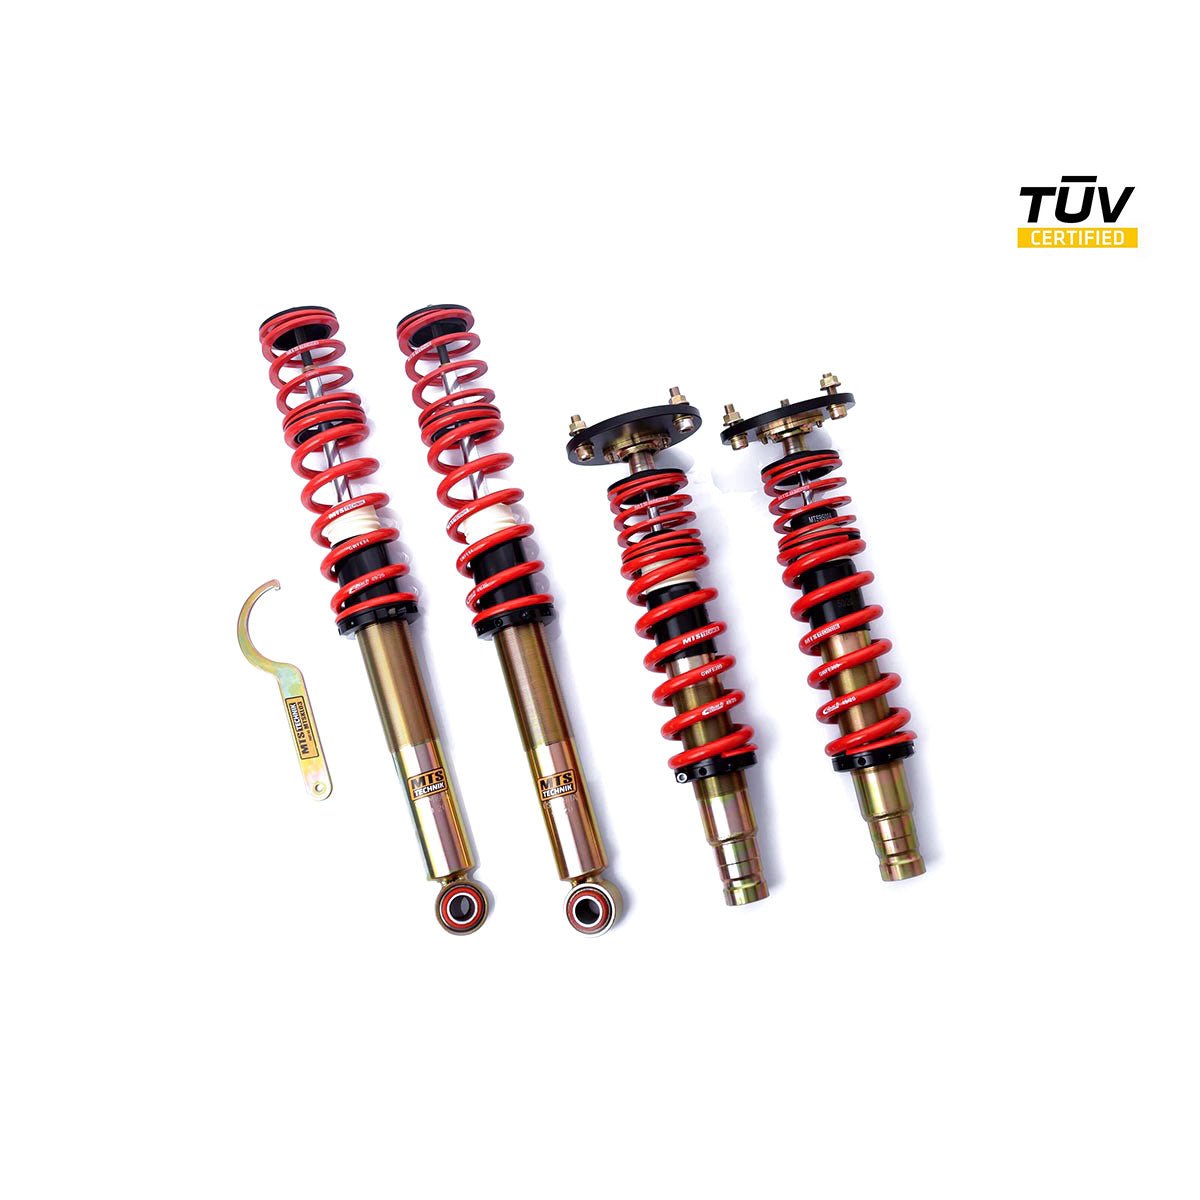 MTS TECHNIK coilover kit STREET Mitsubishi Eclipse 2 (with TÜV) - PARTS33 GmbH